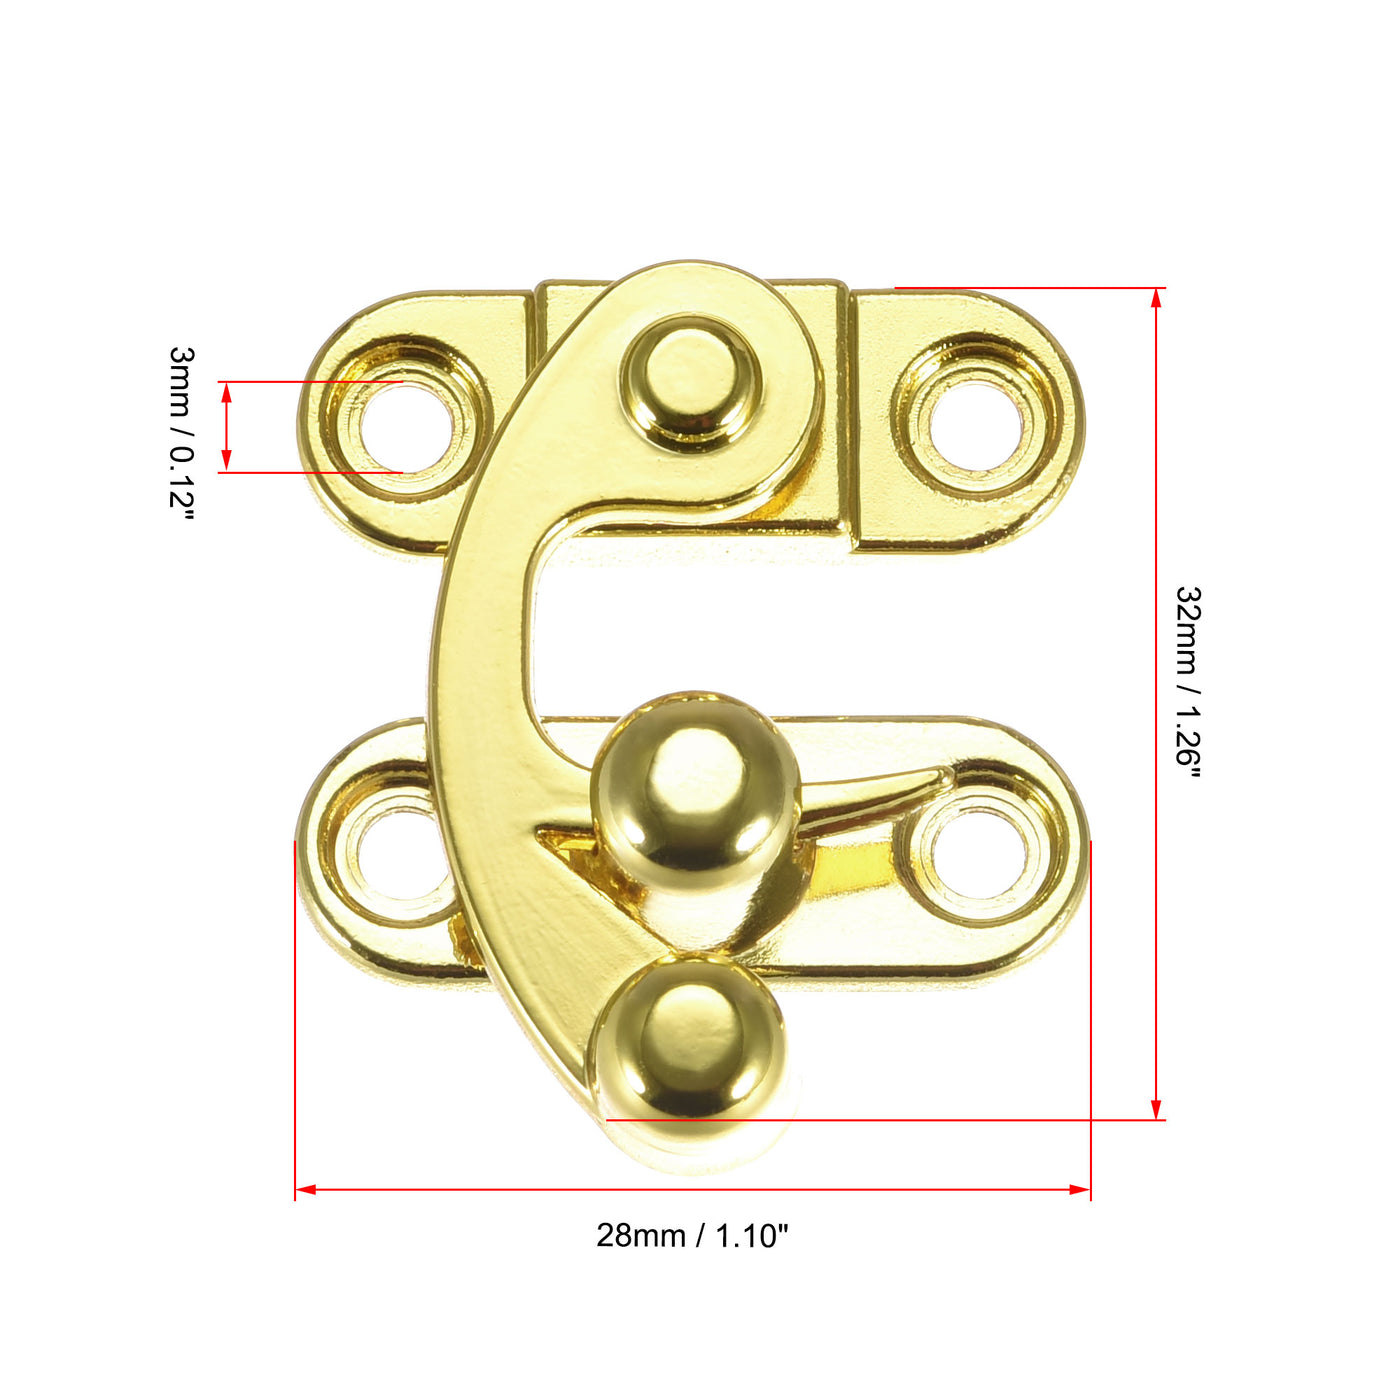 uxcell Uxcell Decorative Antique Right and Left Latch Hook Hasp Swing Arm Latch Gold Tone 1 Set